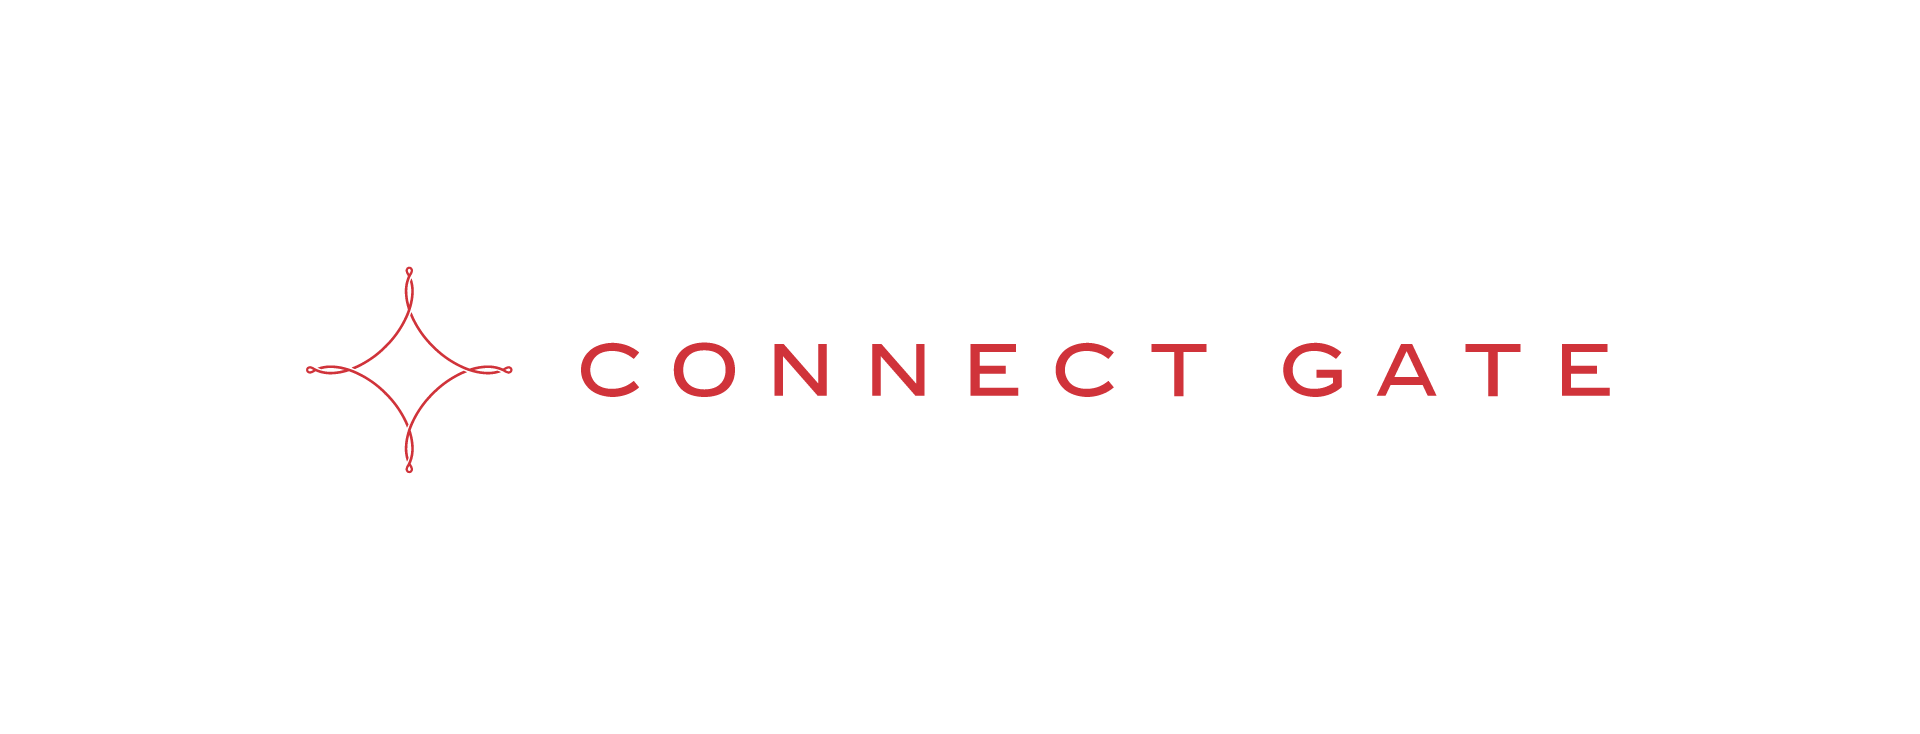 CONNECT GATEロゴ